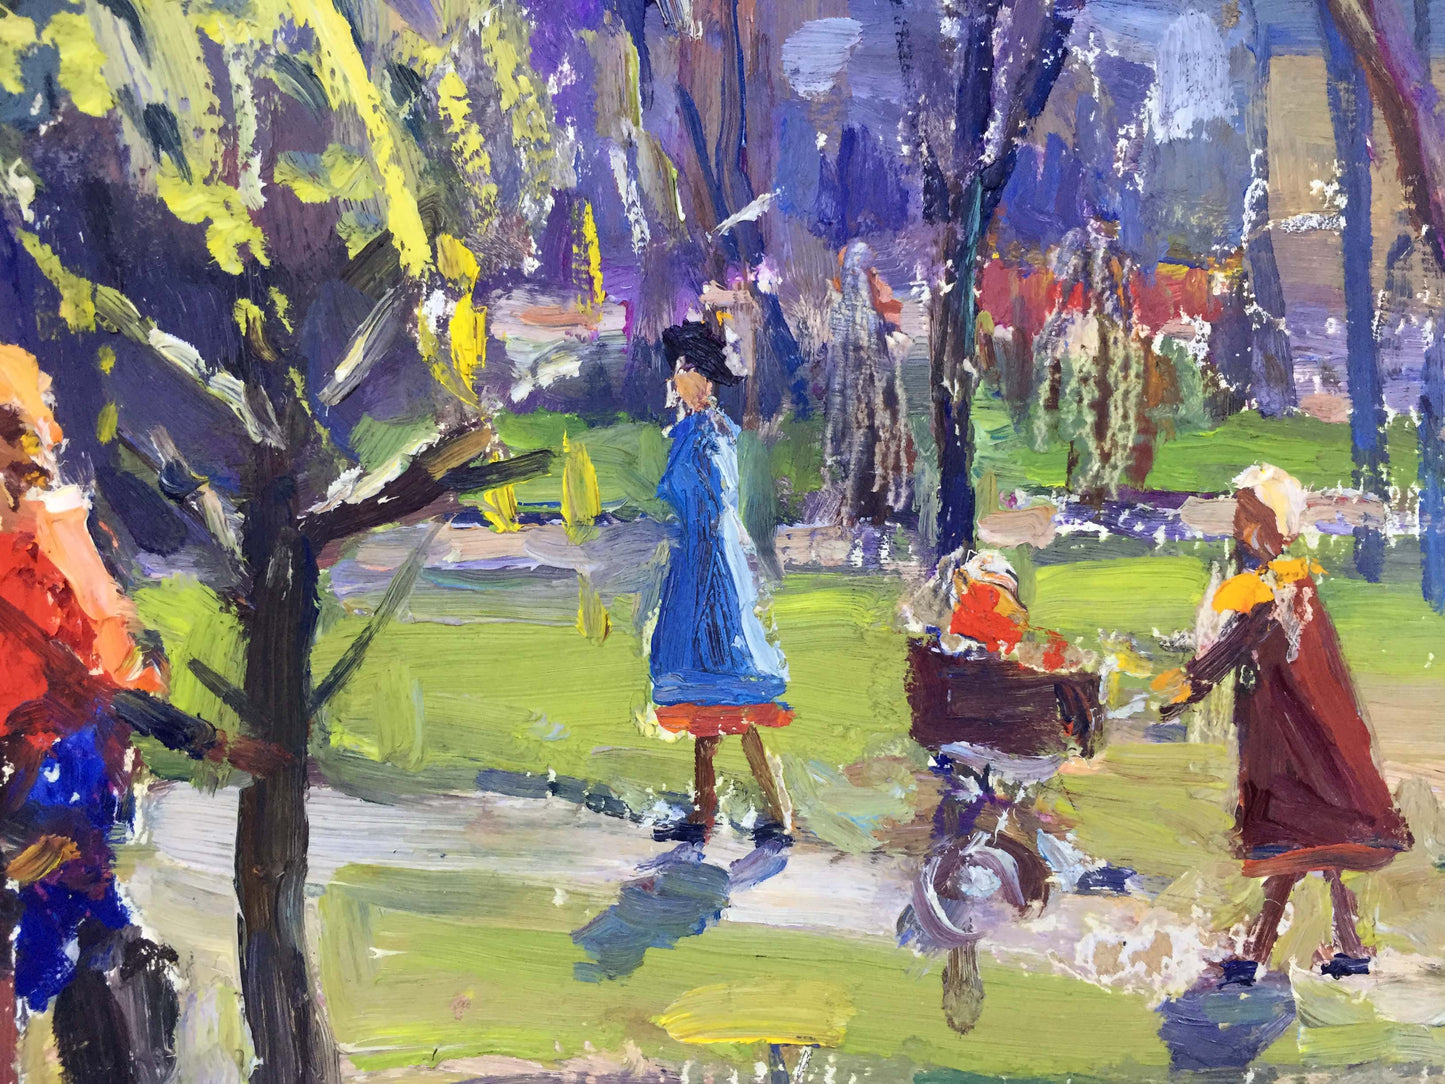 Oil painting People in the park I. Popov